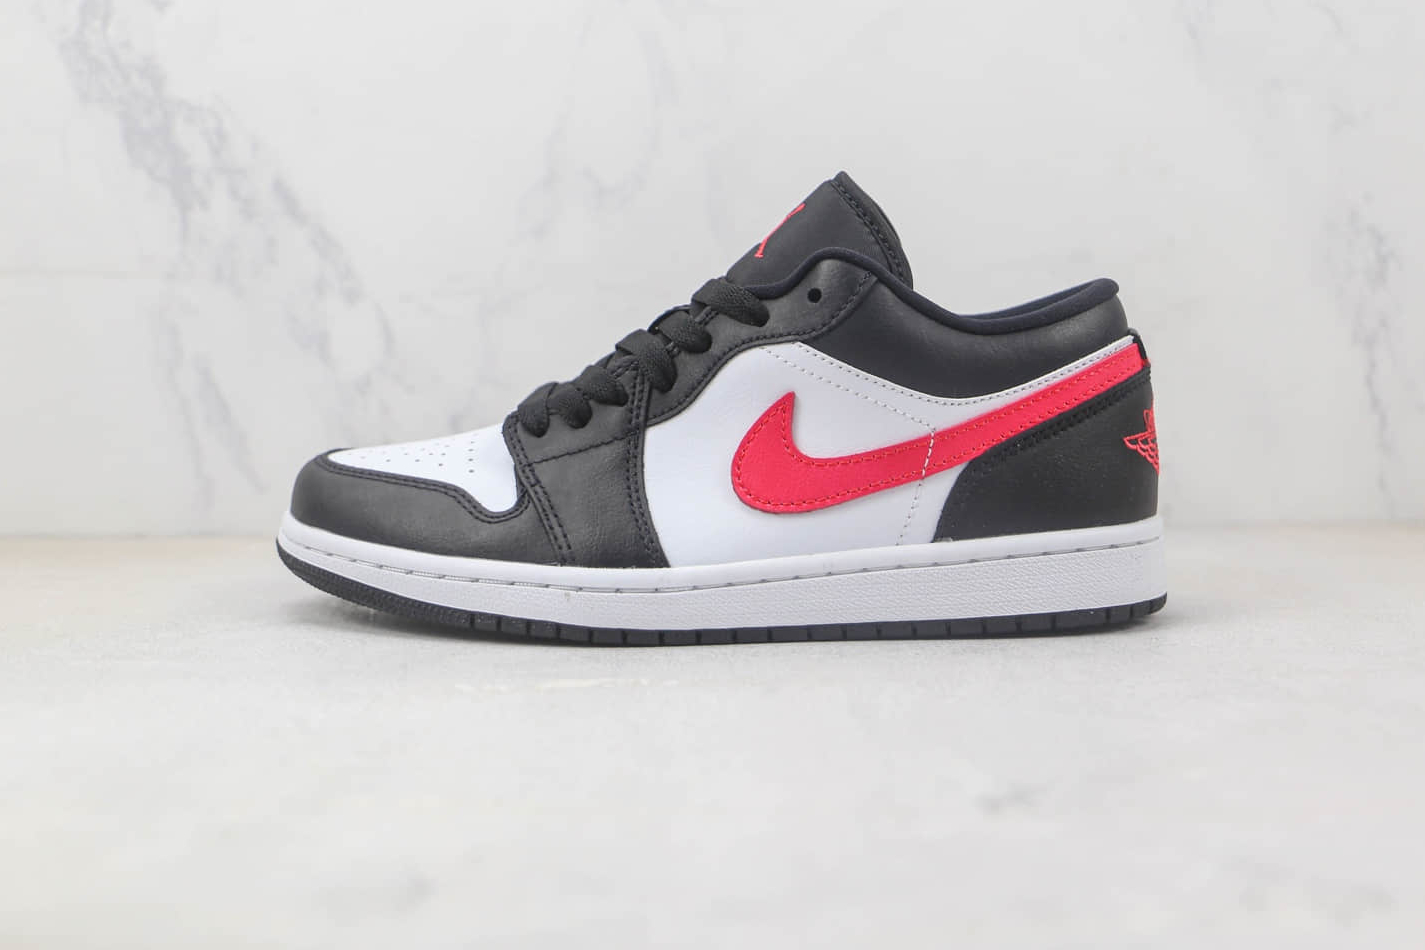 Air Jordan 1 Low 'Black Siren Red' DC0774-004 - Stylish and Iconic Sneakers